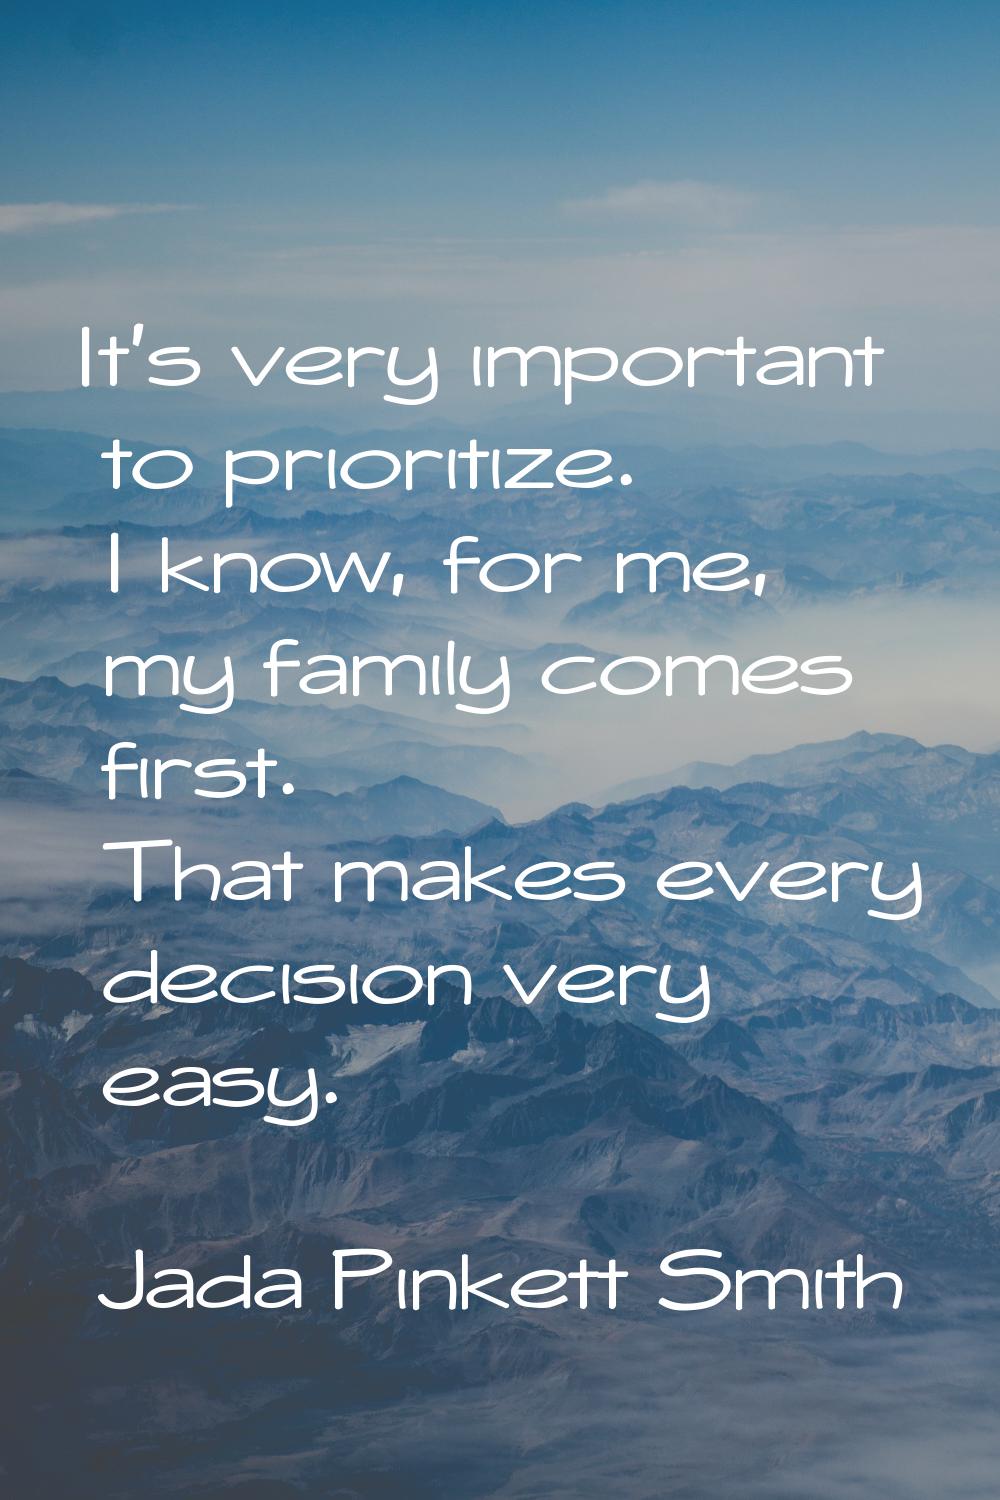 It's very important to prioritize. I know, for me, my family comes first. That makes every decision